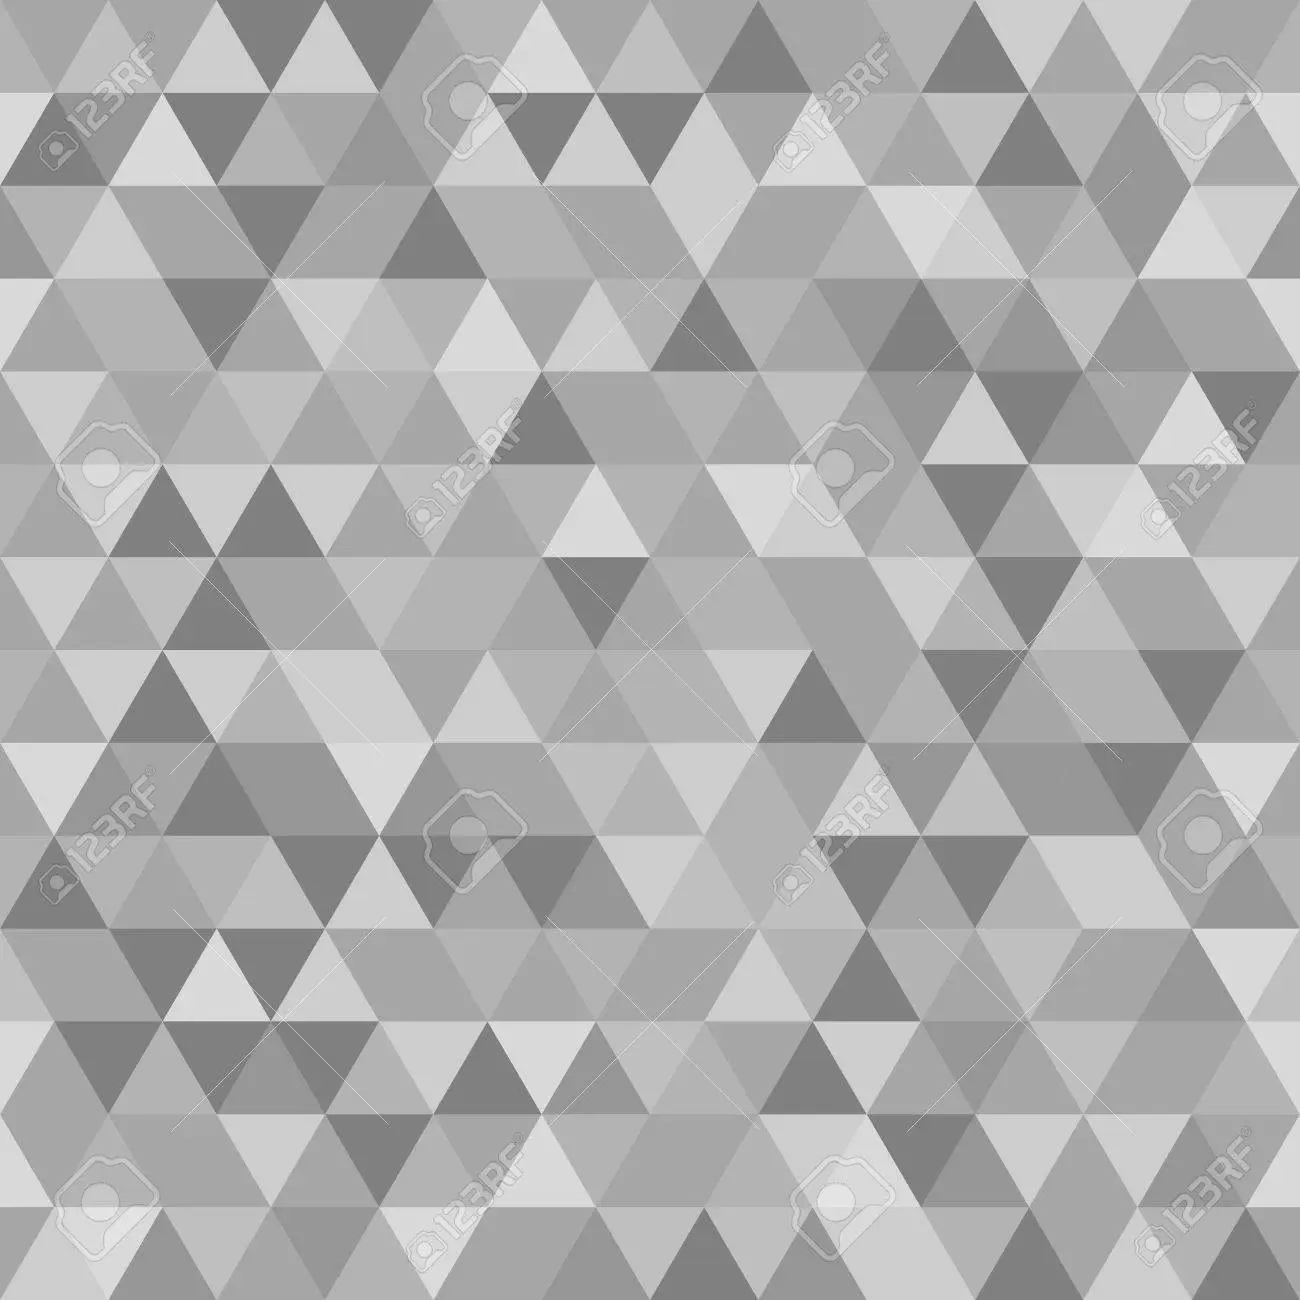 Geometric vector pattern with gray triangles seamless abstract texture for wallpapers and backgrounds royalty free svg cliparts vectors and stock illustration image